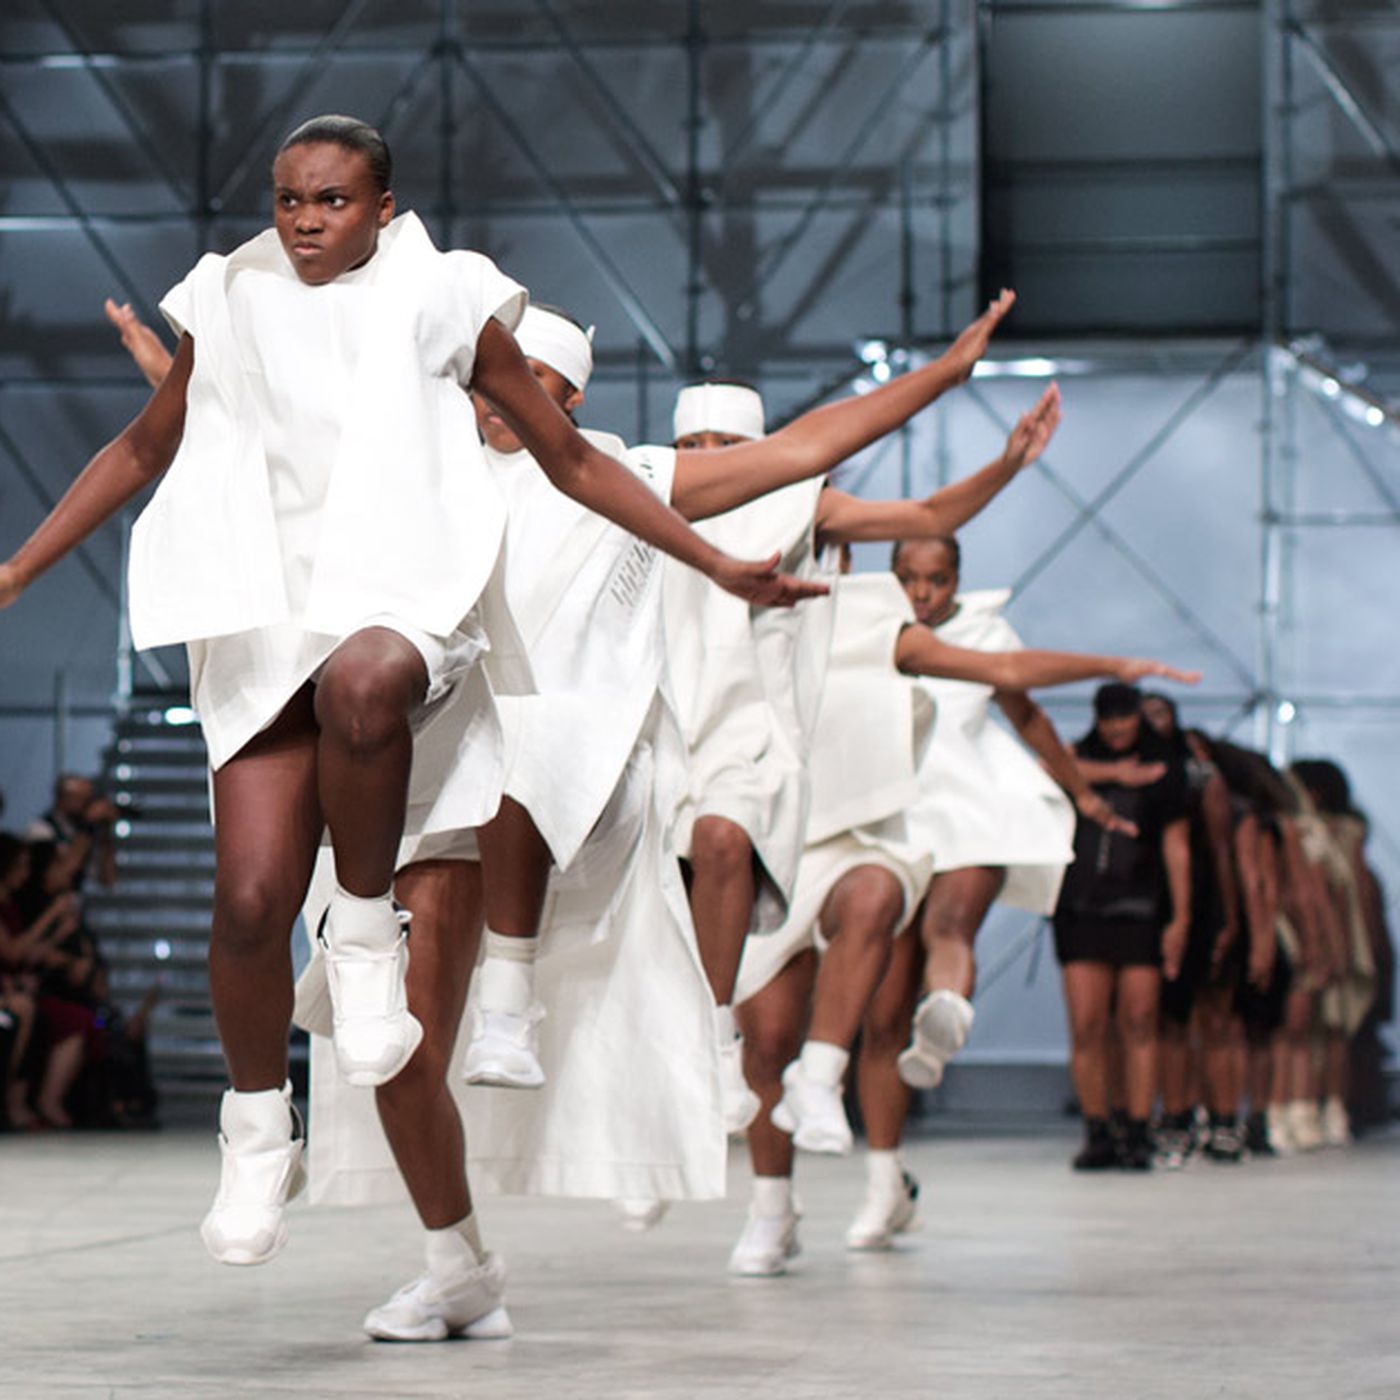 Opmuntring Fugtig protein Rick Owens' Incredible S/S 2014 Runway Showcases Stepping - Racked